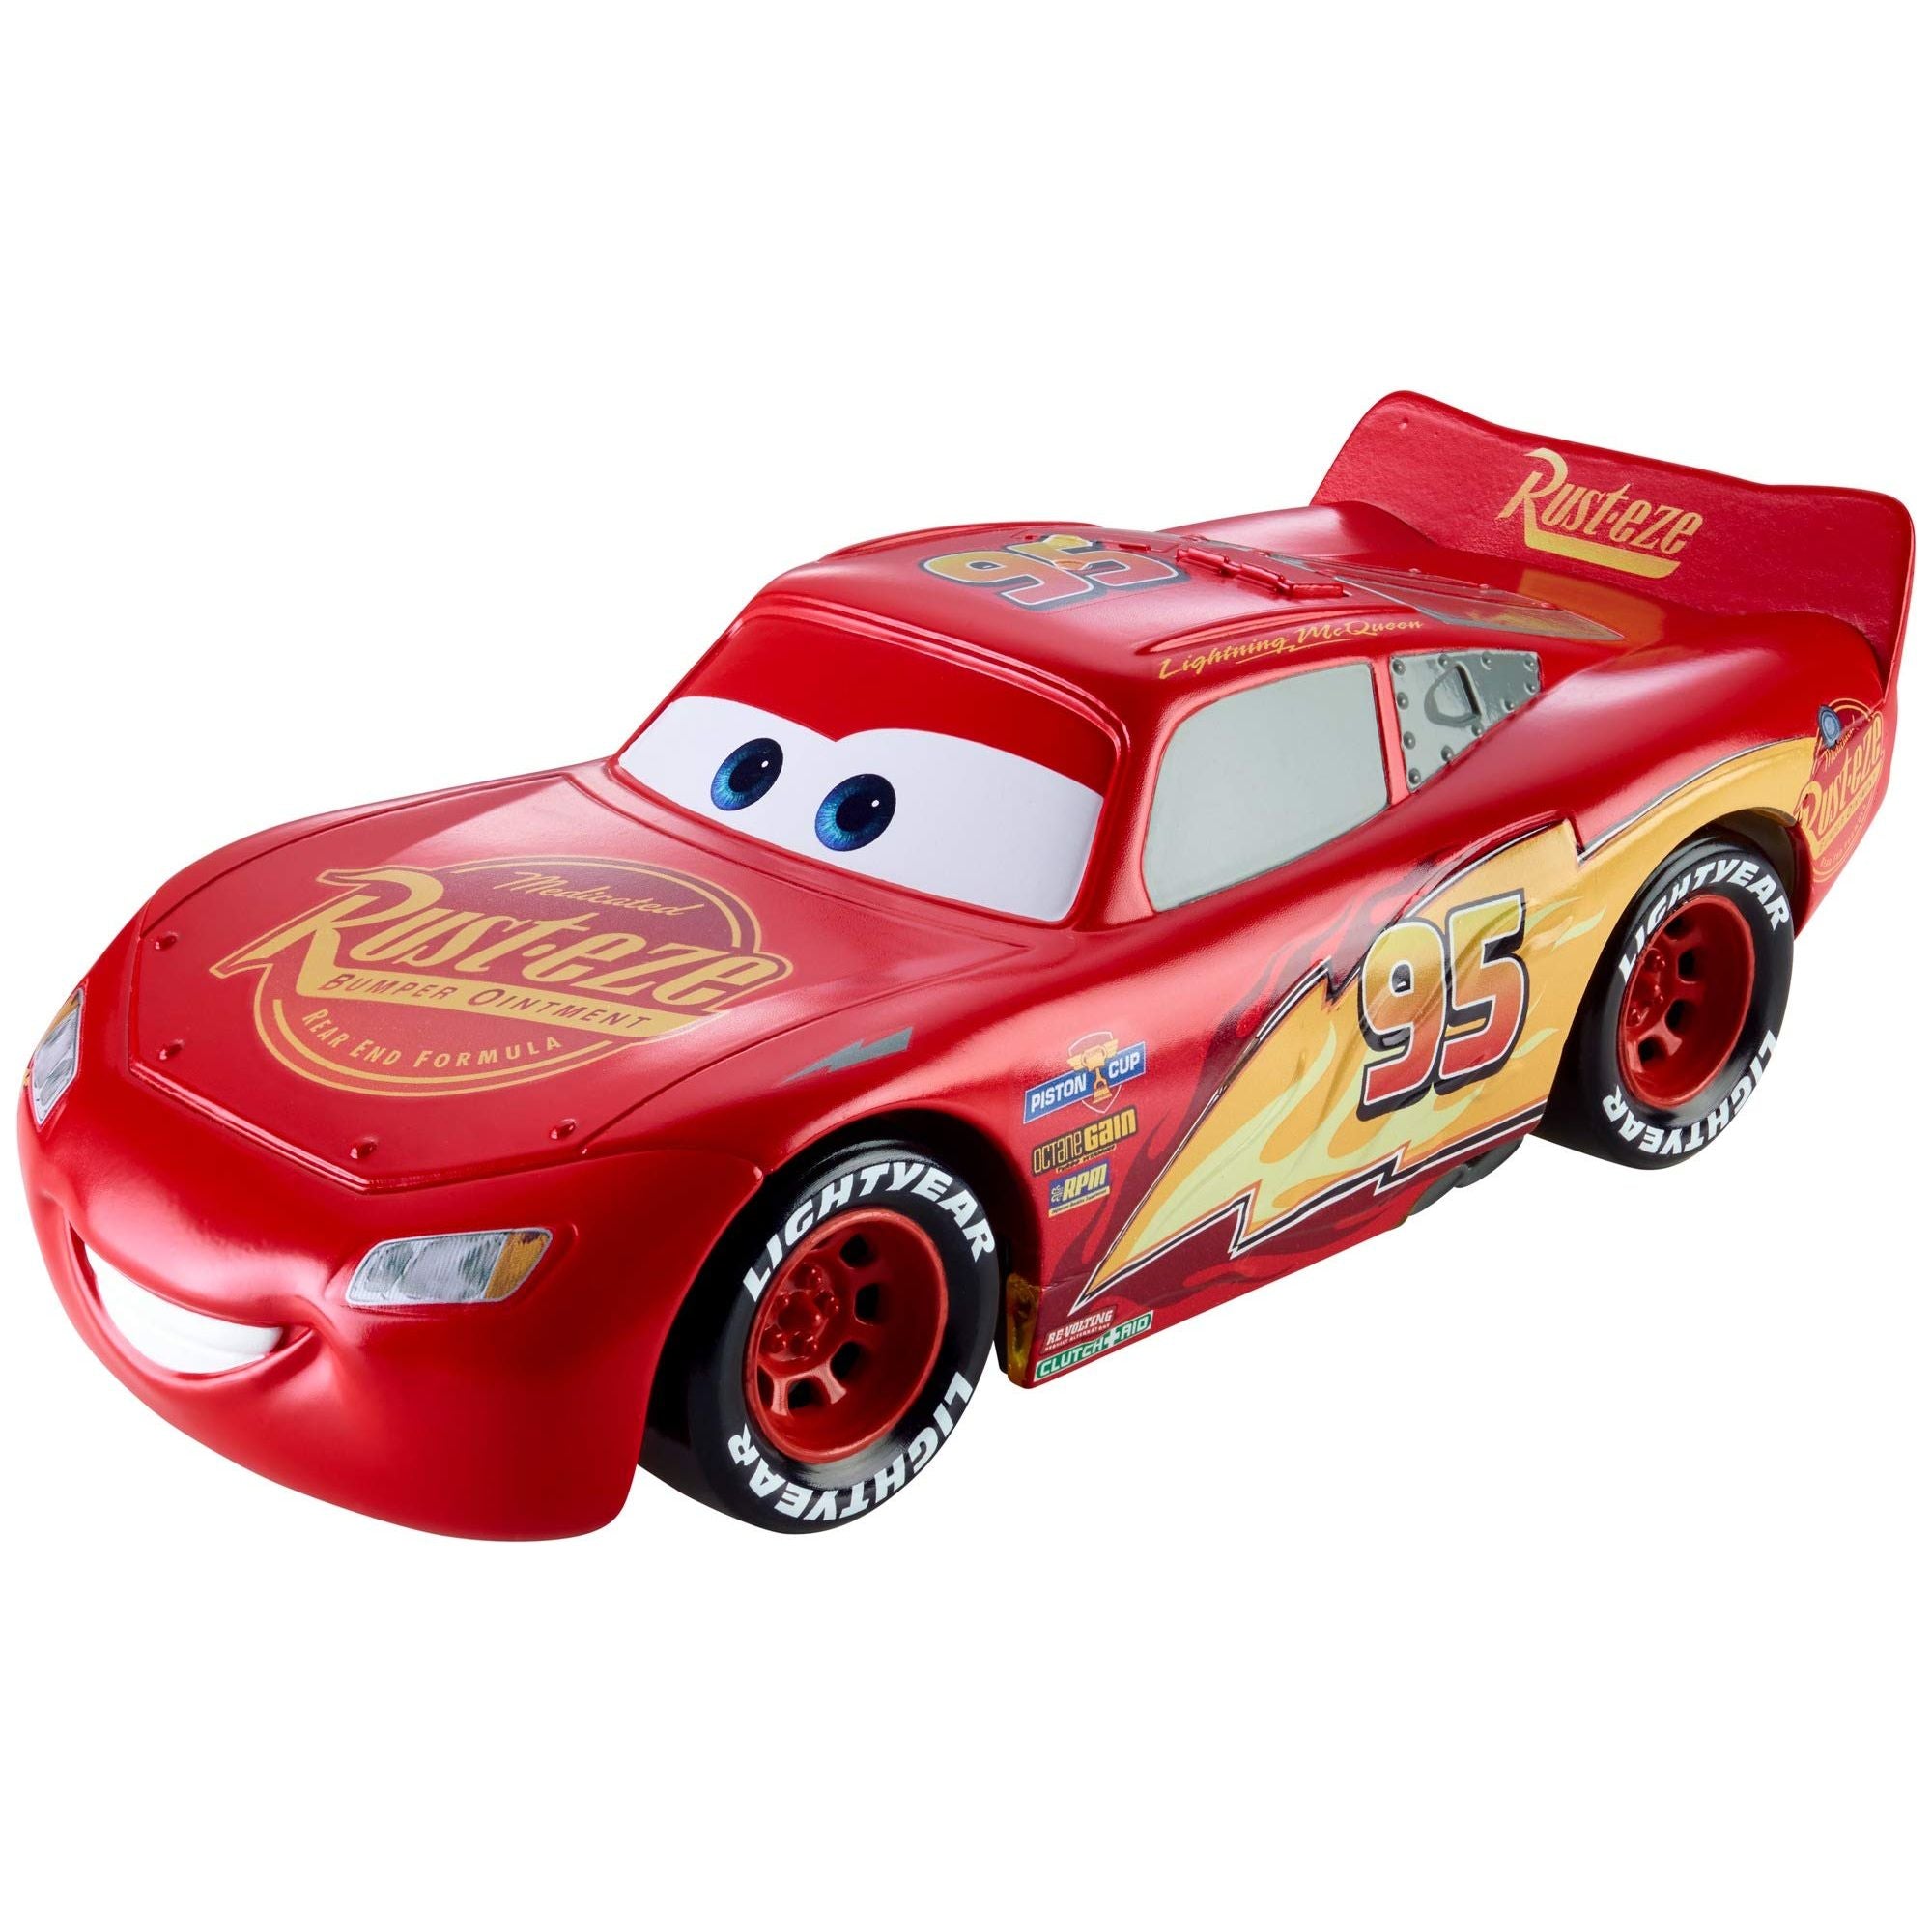 Cars Lightning McQueen Die Cast Small Car - 8.5 inches